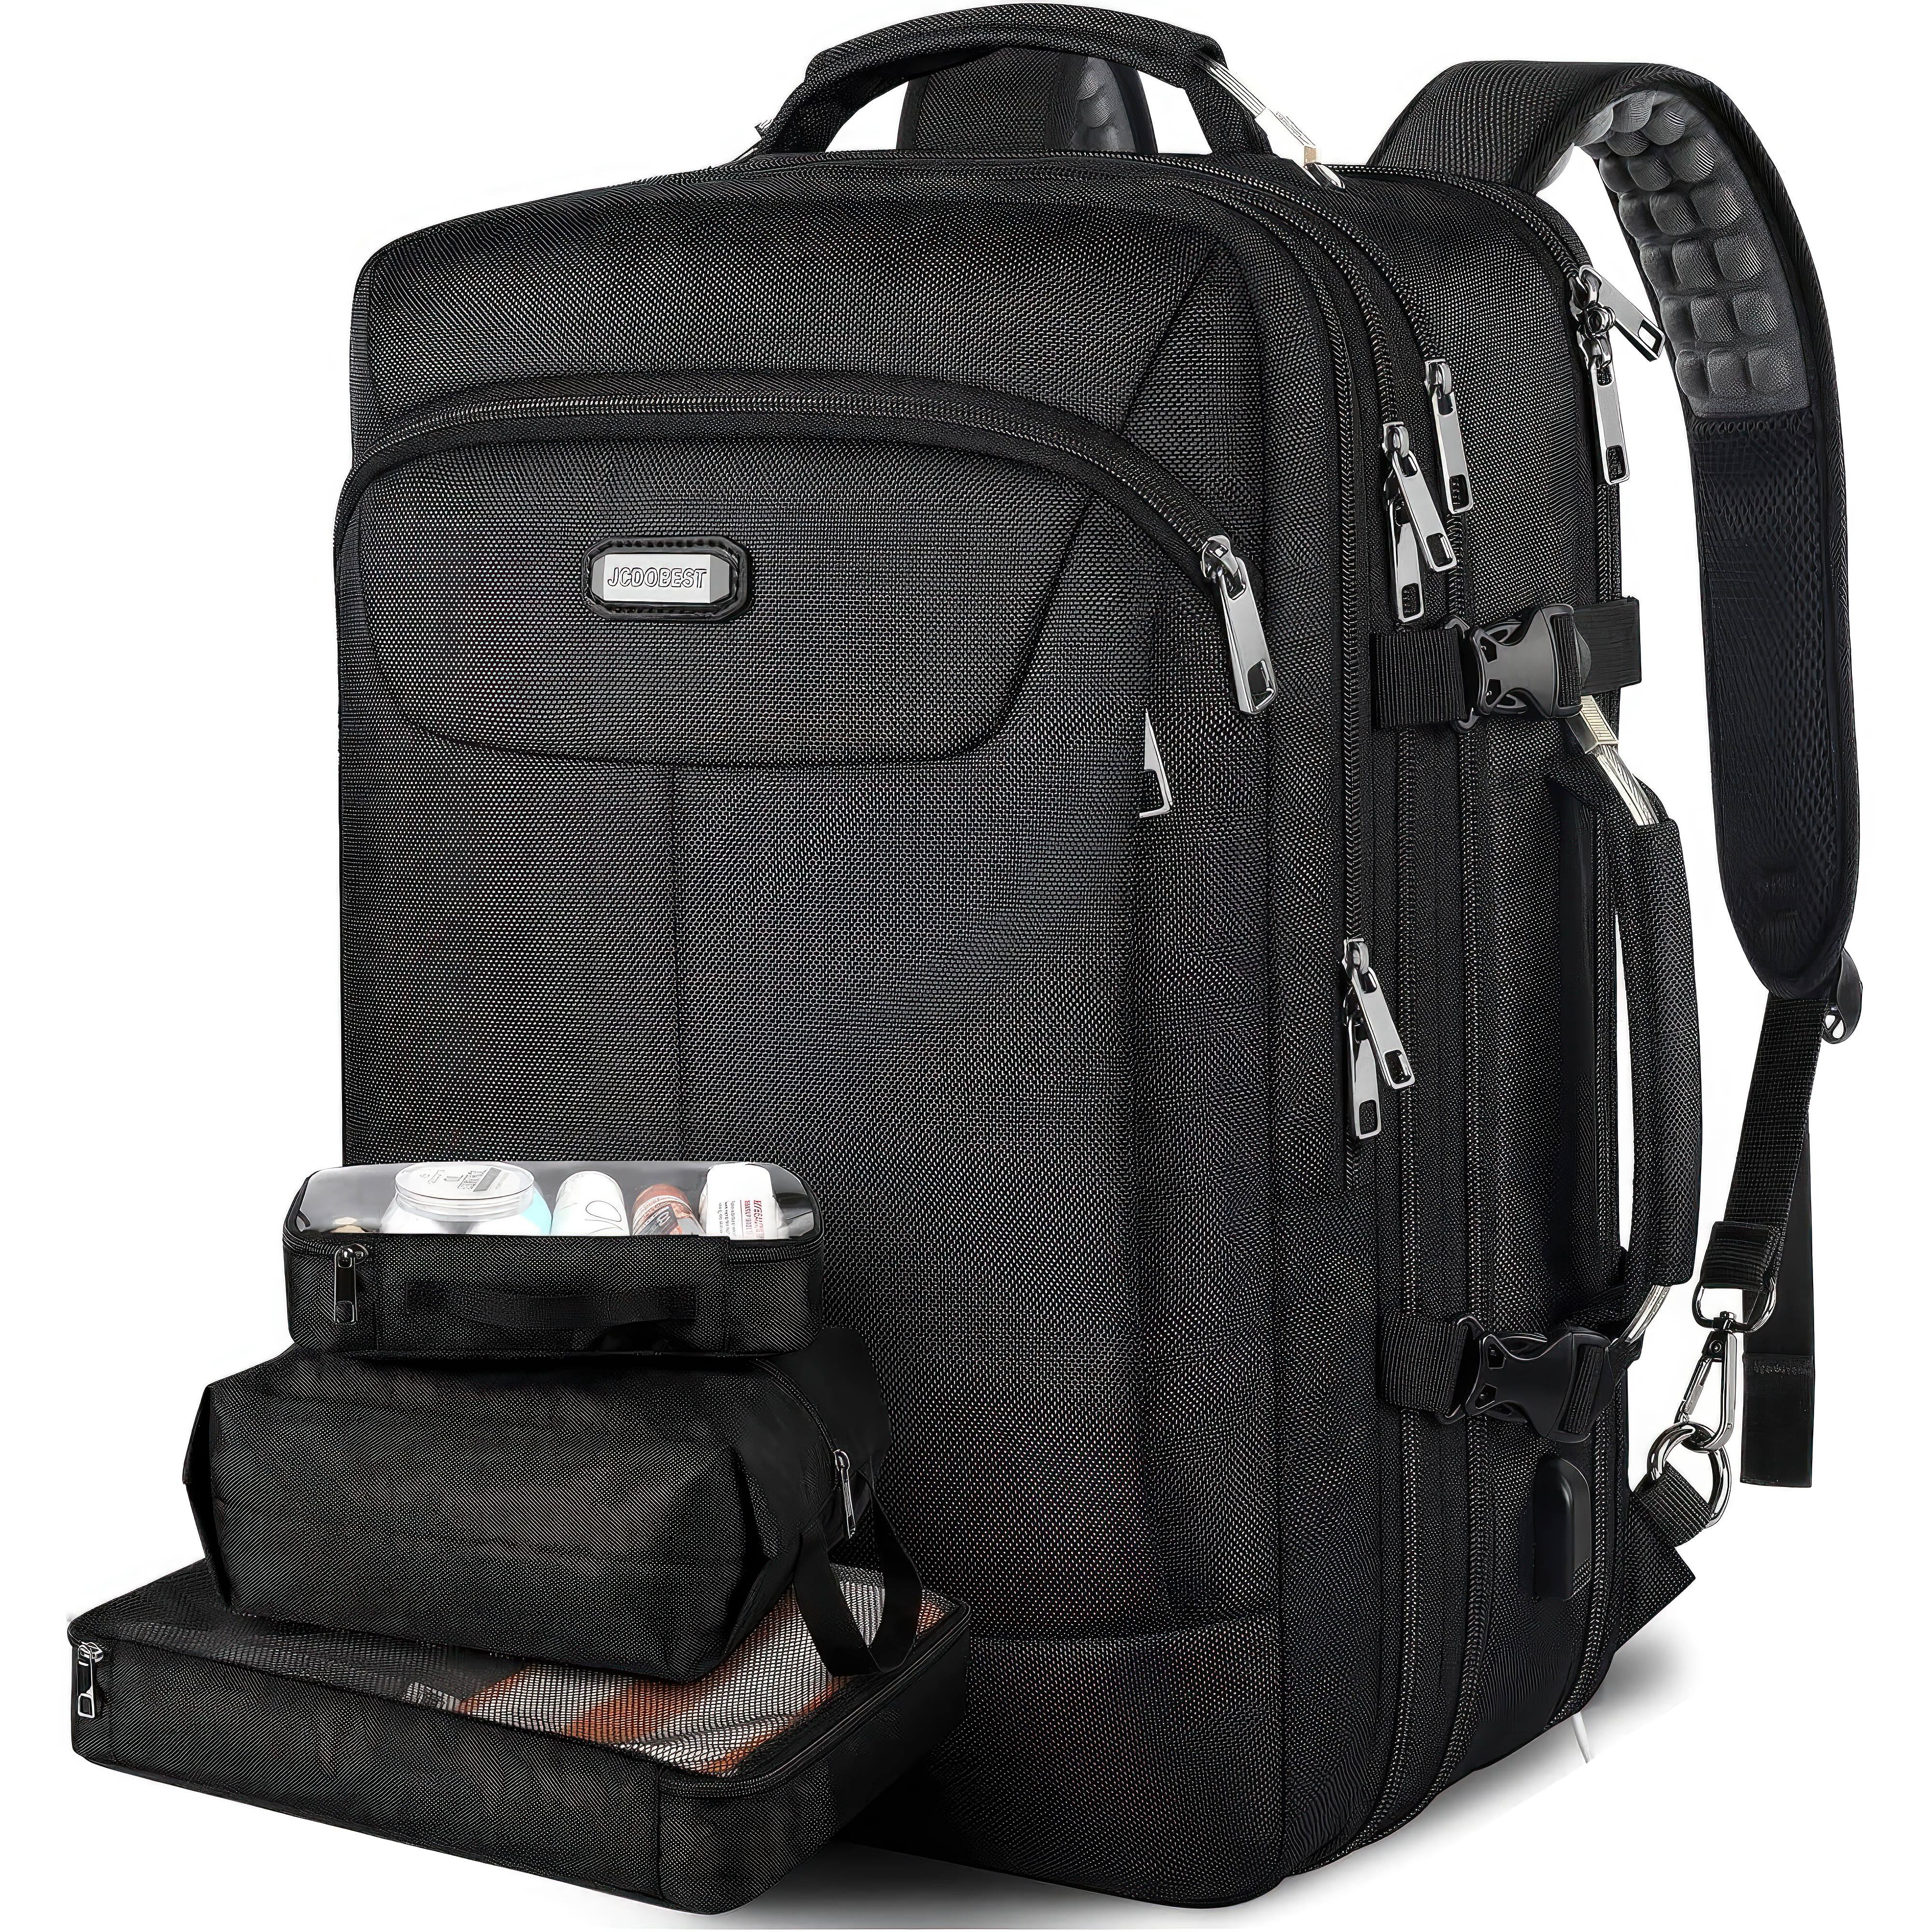 JCDOBEST Carry On Backpack